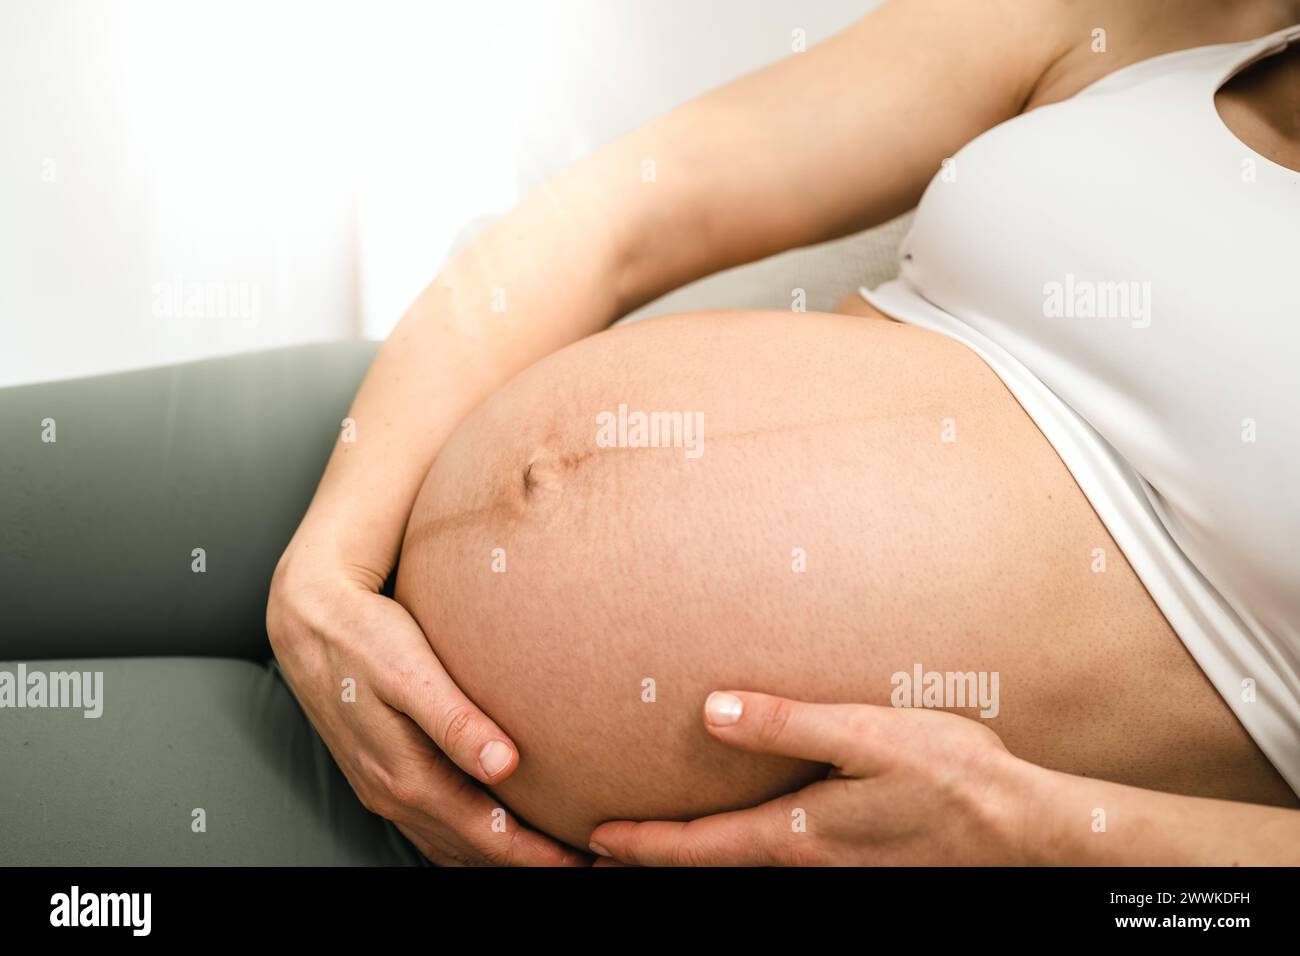 Description: View of woman lying on her side on a sofa gently holding her belly in the last stage of pregnancy. Pregnancy third trimester - week 34. S Stock Photo